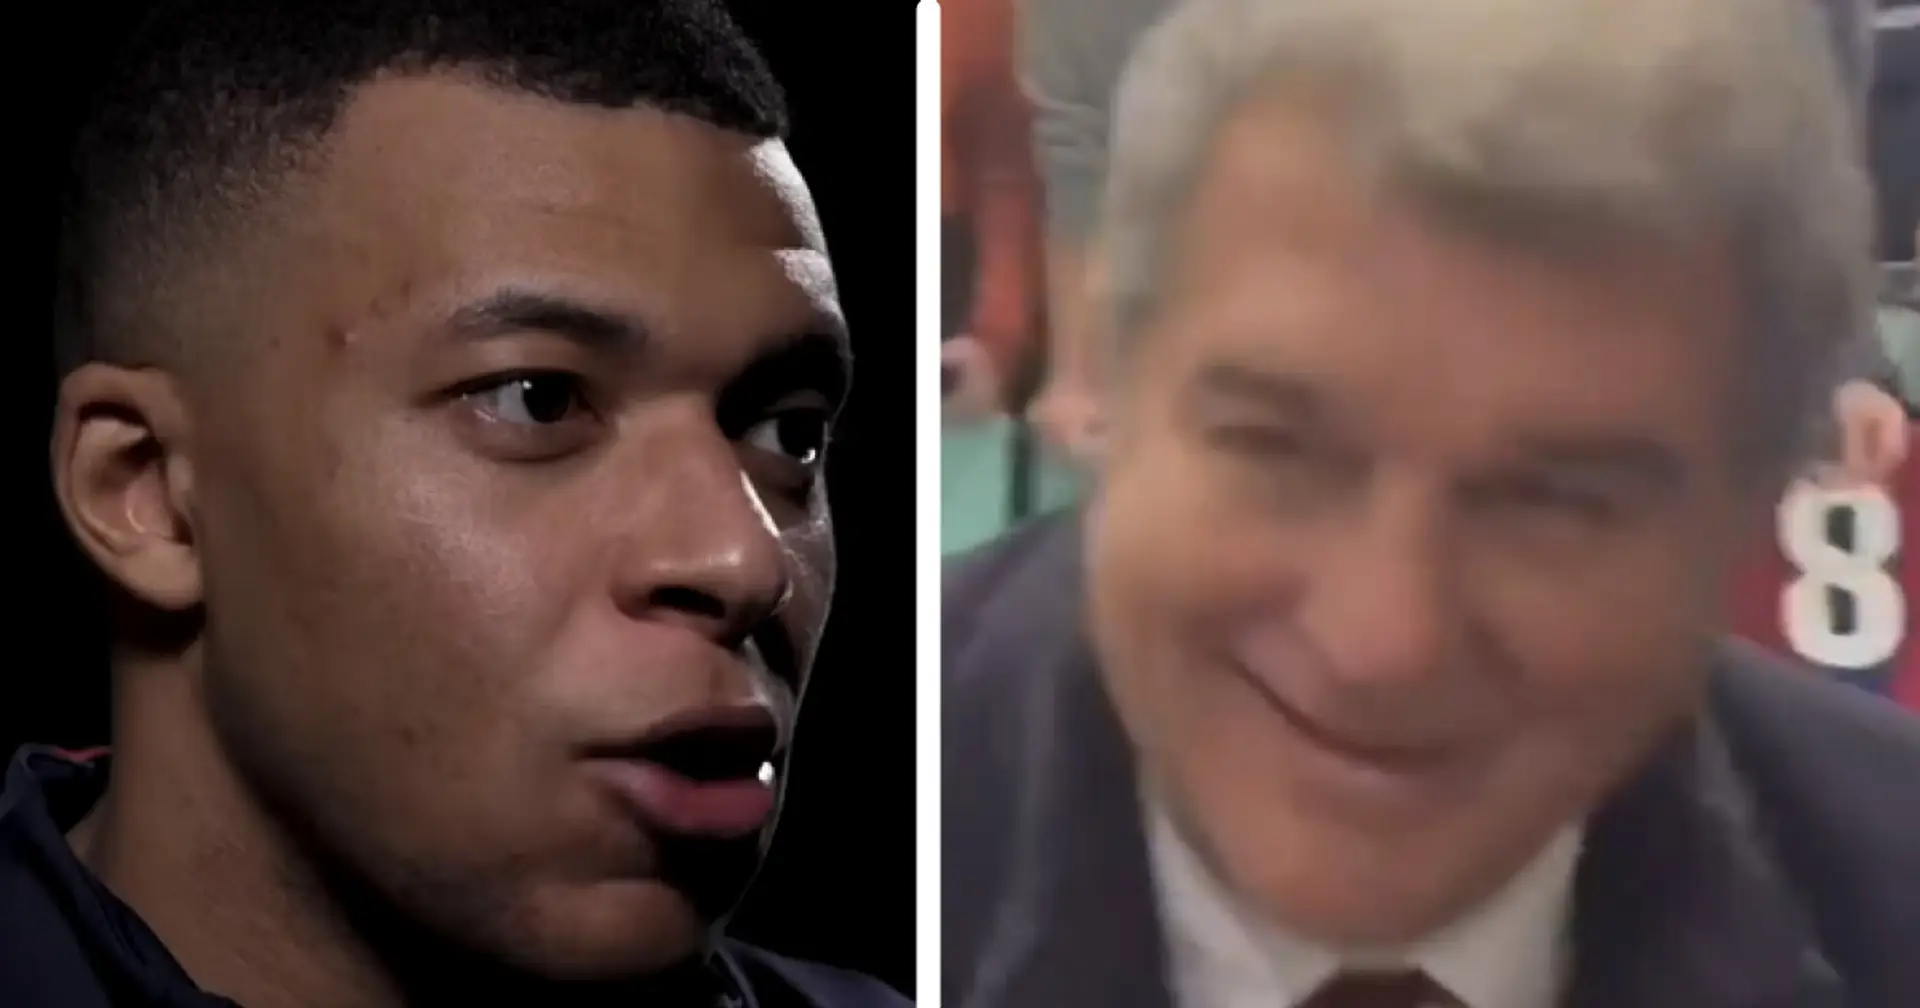 Barca fan asks Laporta to sign Mbappe, response caught on camera